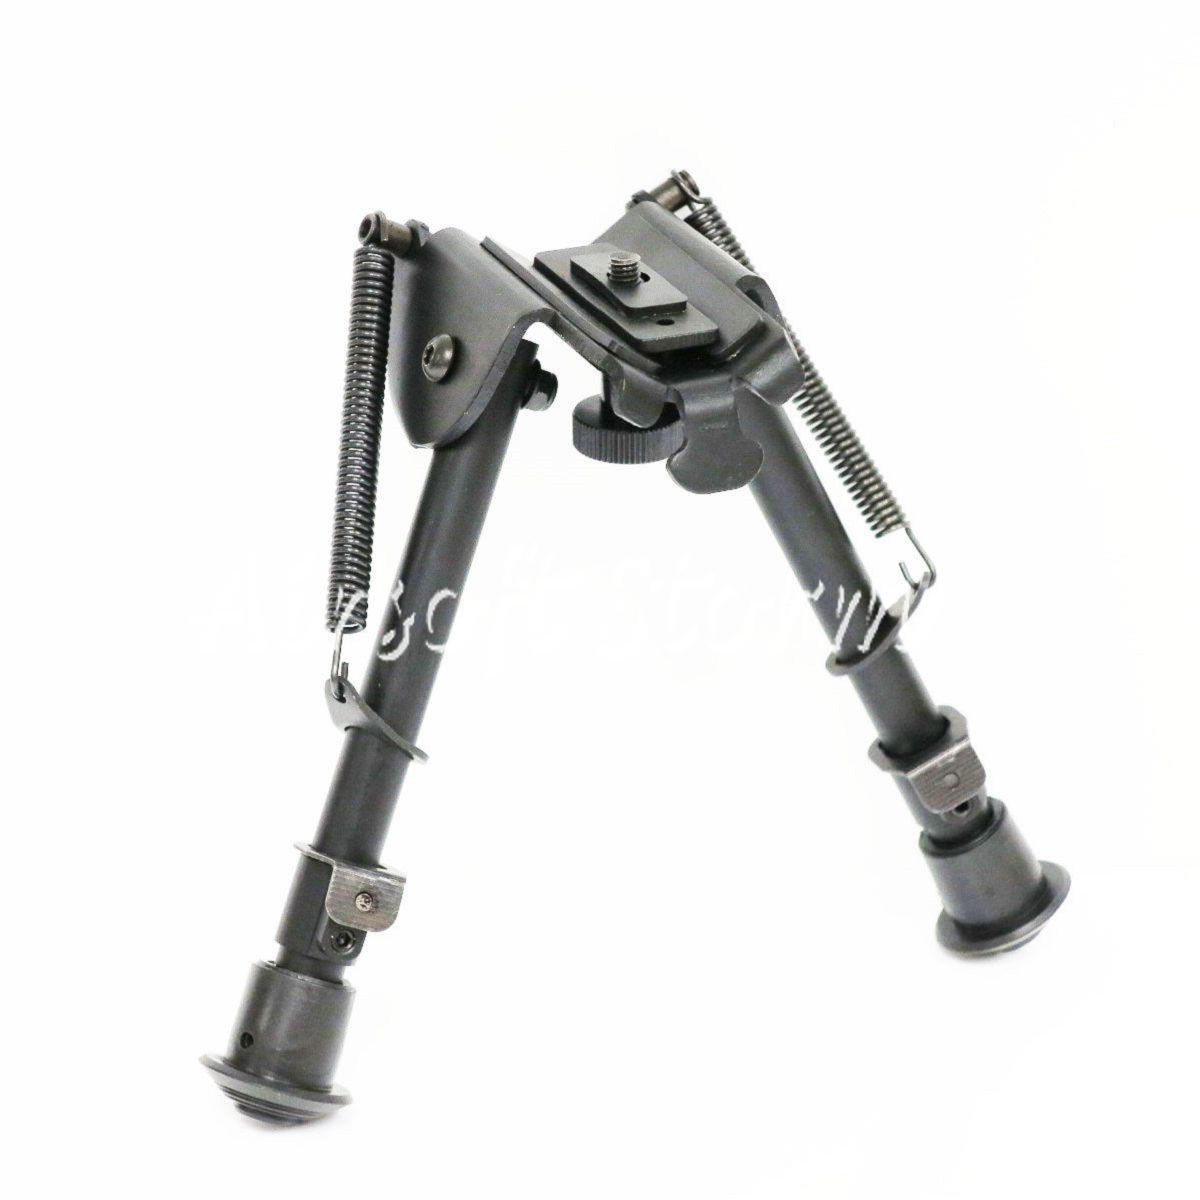 Shooting Gear Universal Rifle Spring Eject Rest 6"-9" Metal Bipod